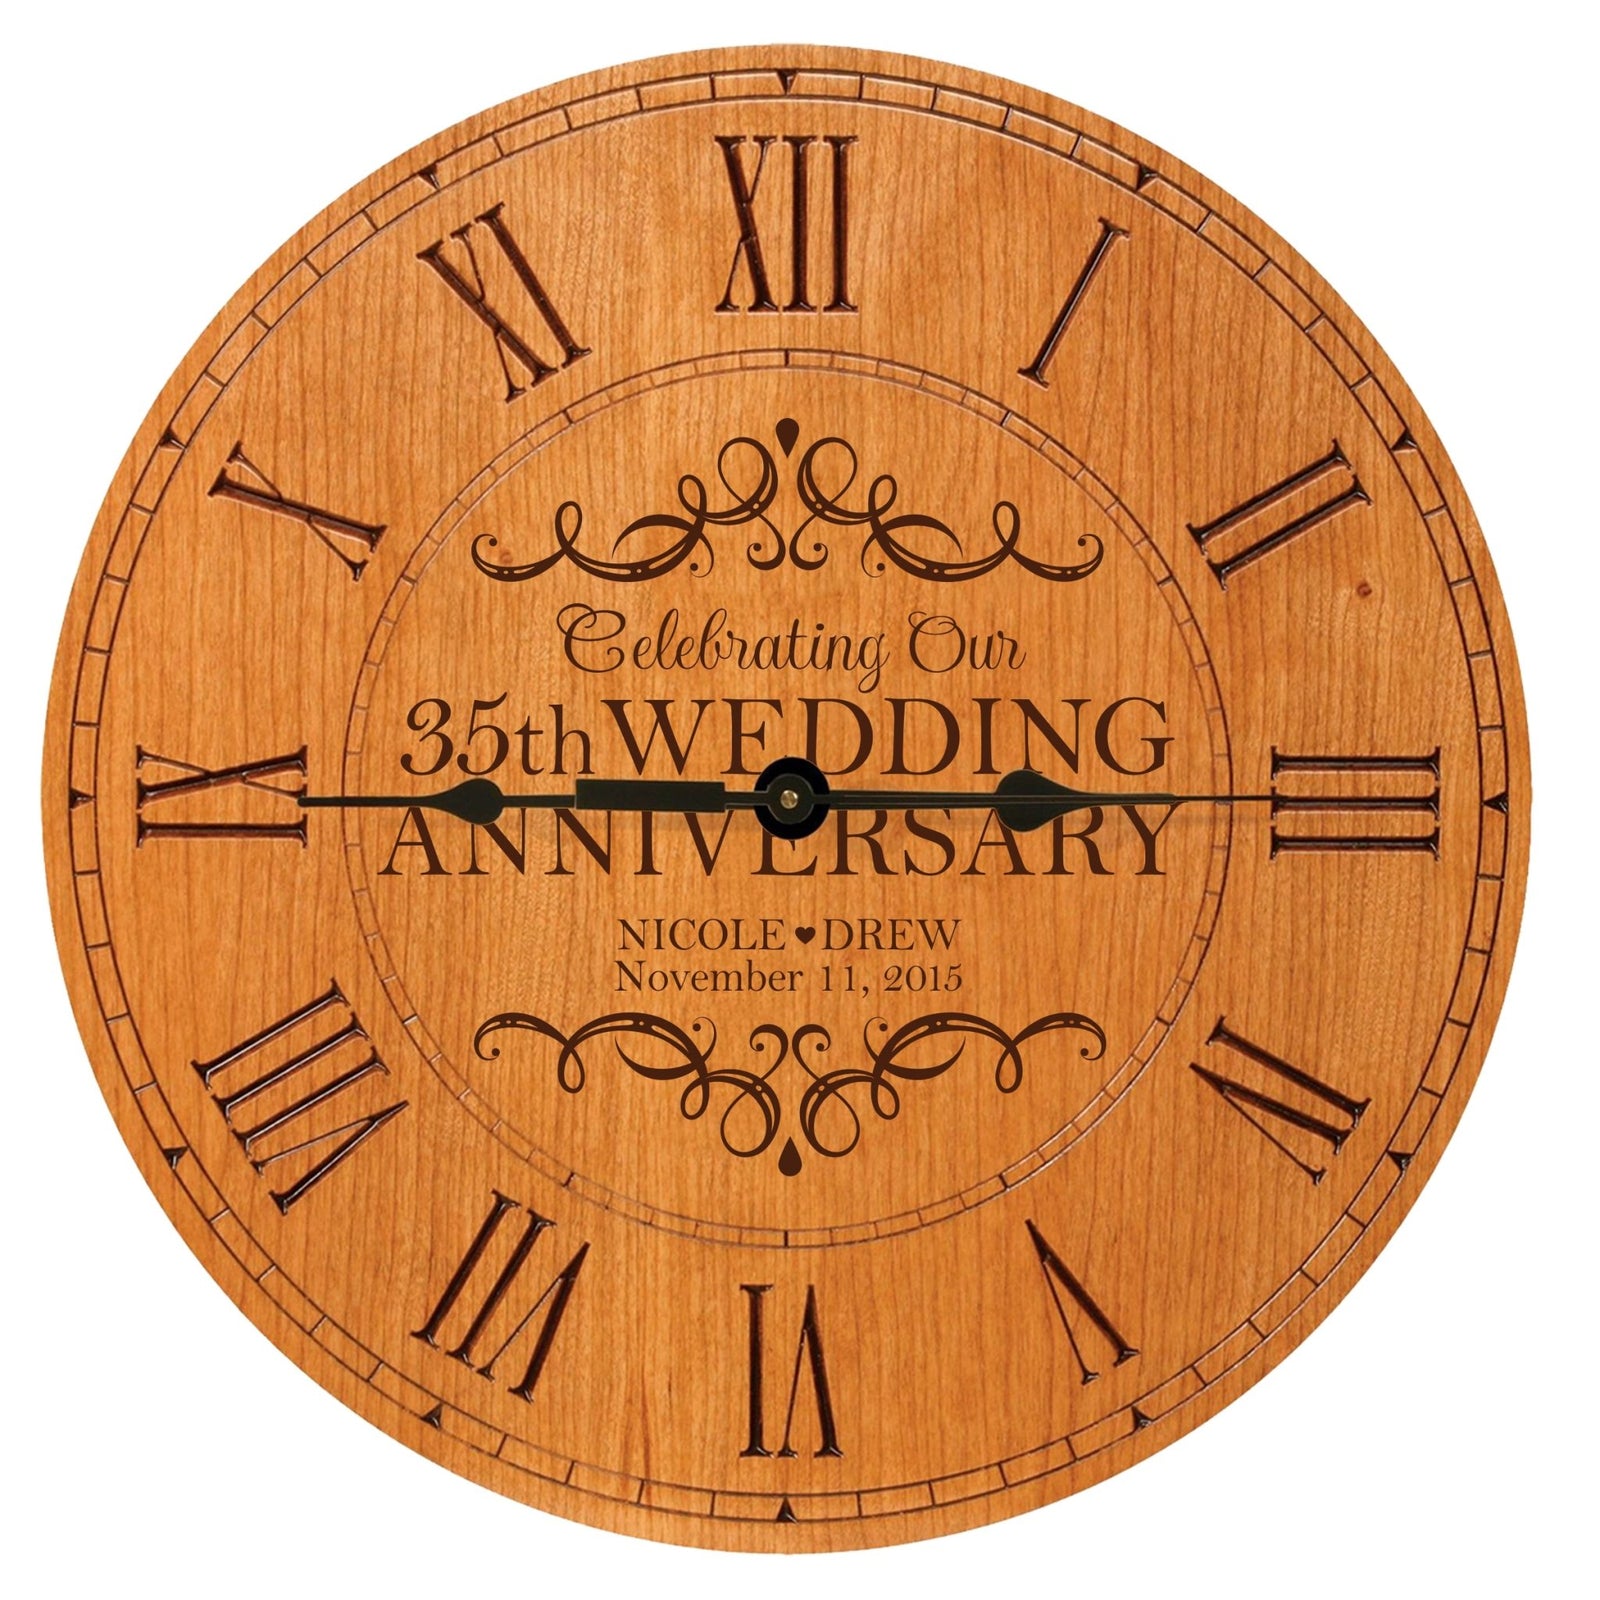 Lifesong Milestones Personalized Engraved Wooden Wall Clock for 35th Wedding Anniversary Gift Ideas